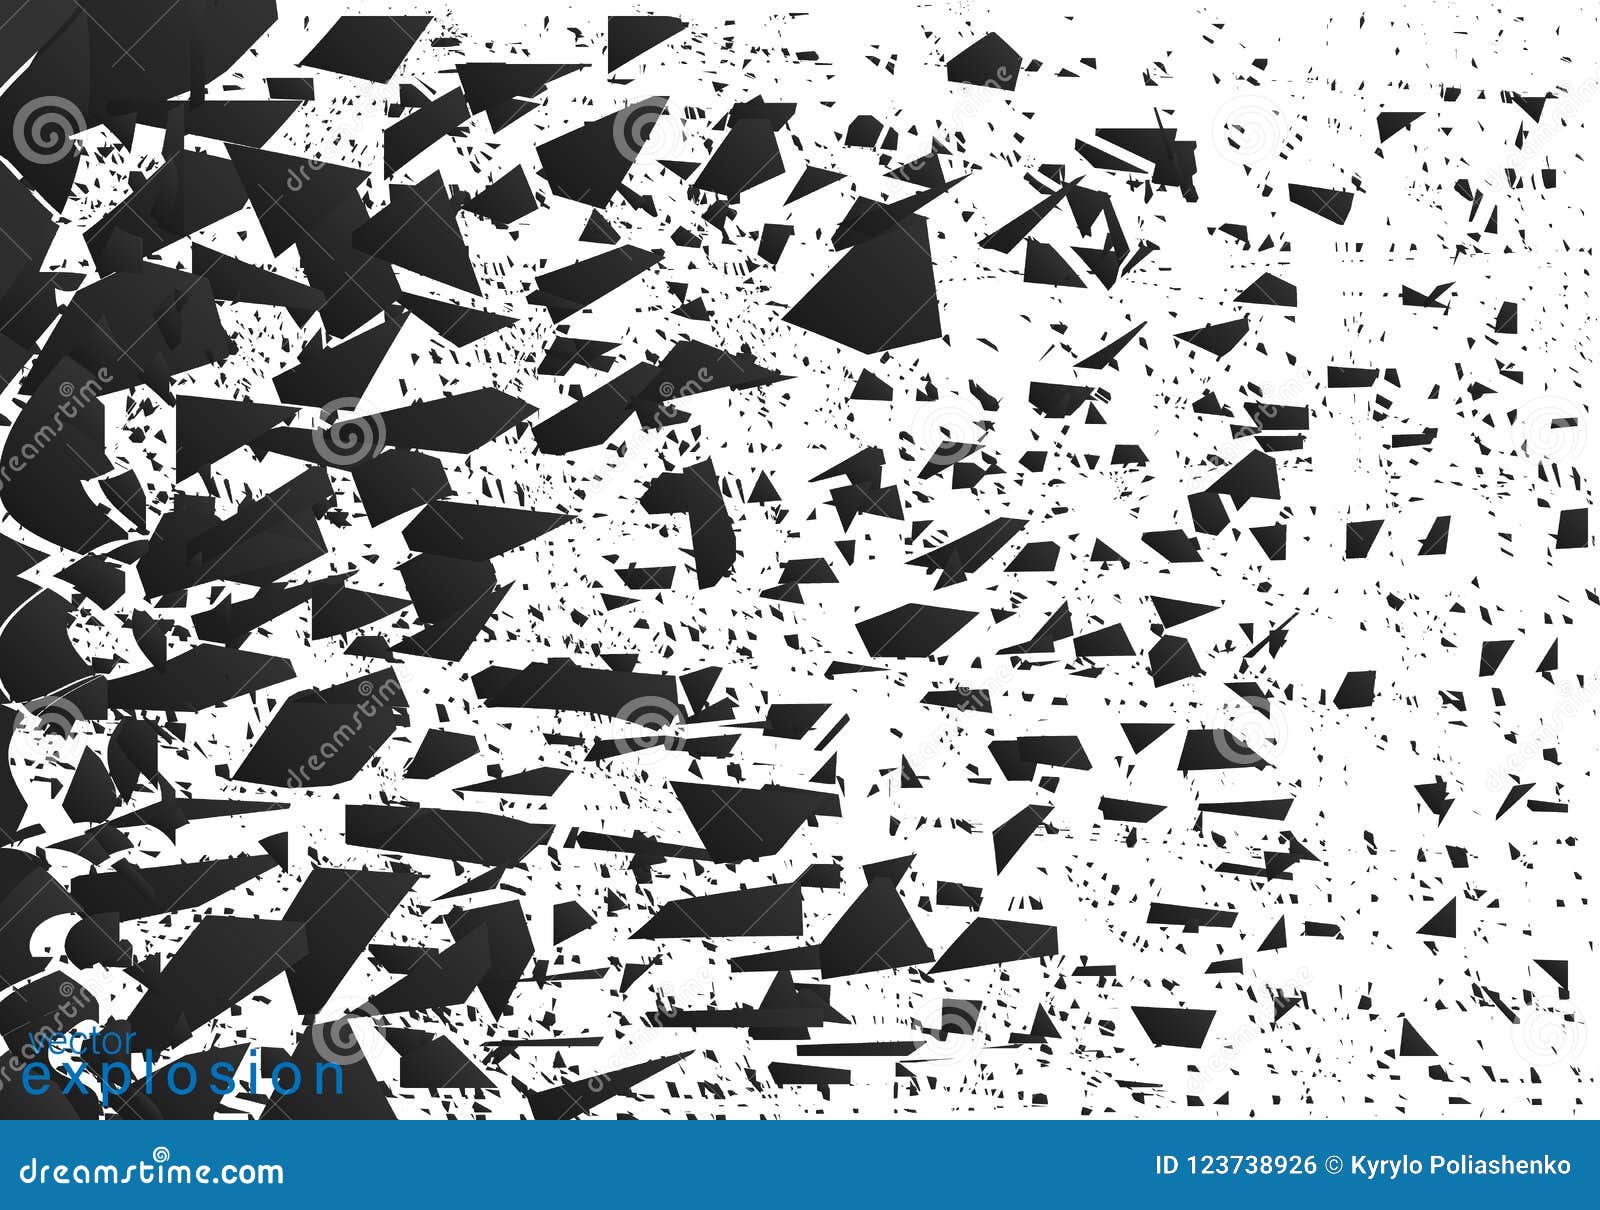 Abstract Explosion of Black. Stock Vector - Illustration of graphic ...